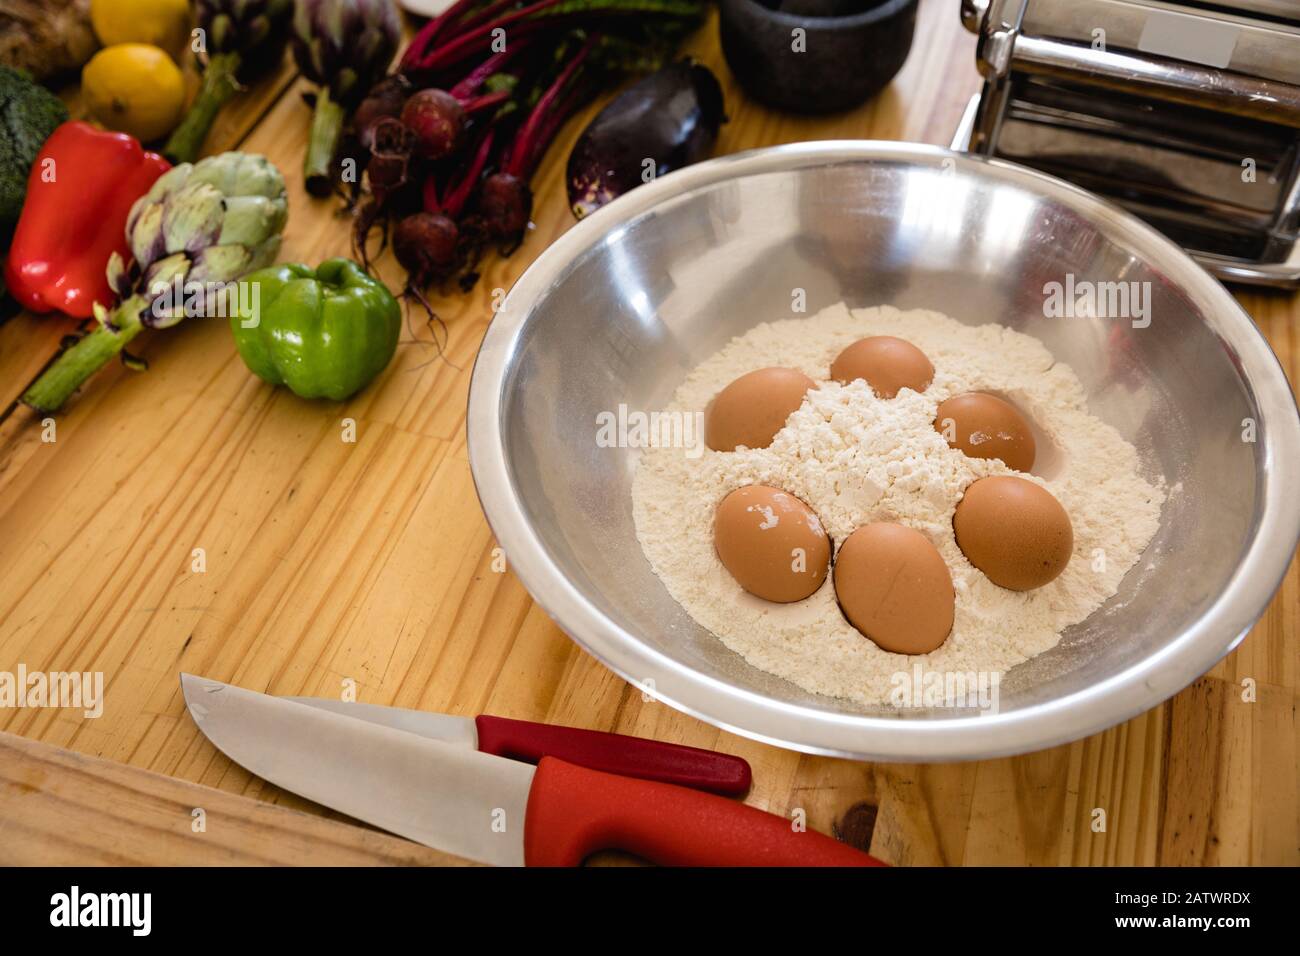 Salad bowl with flour and eggs inside Stock Photo